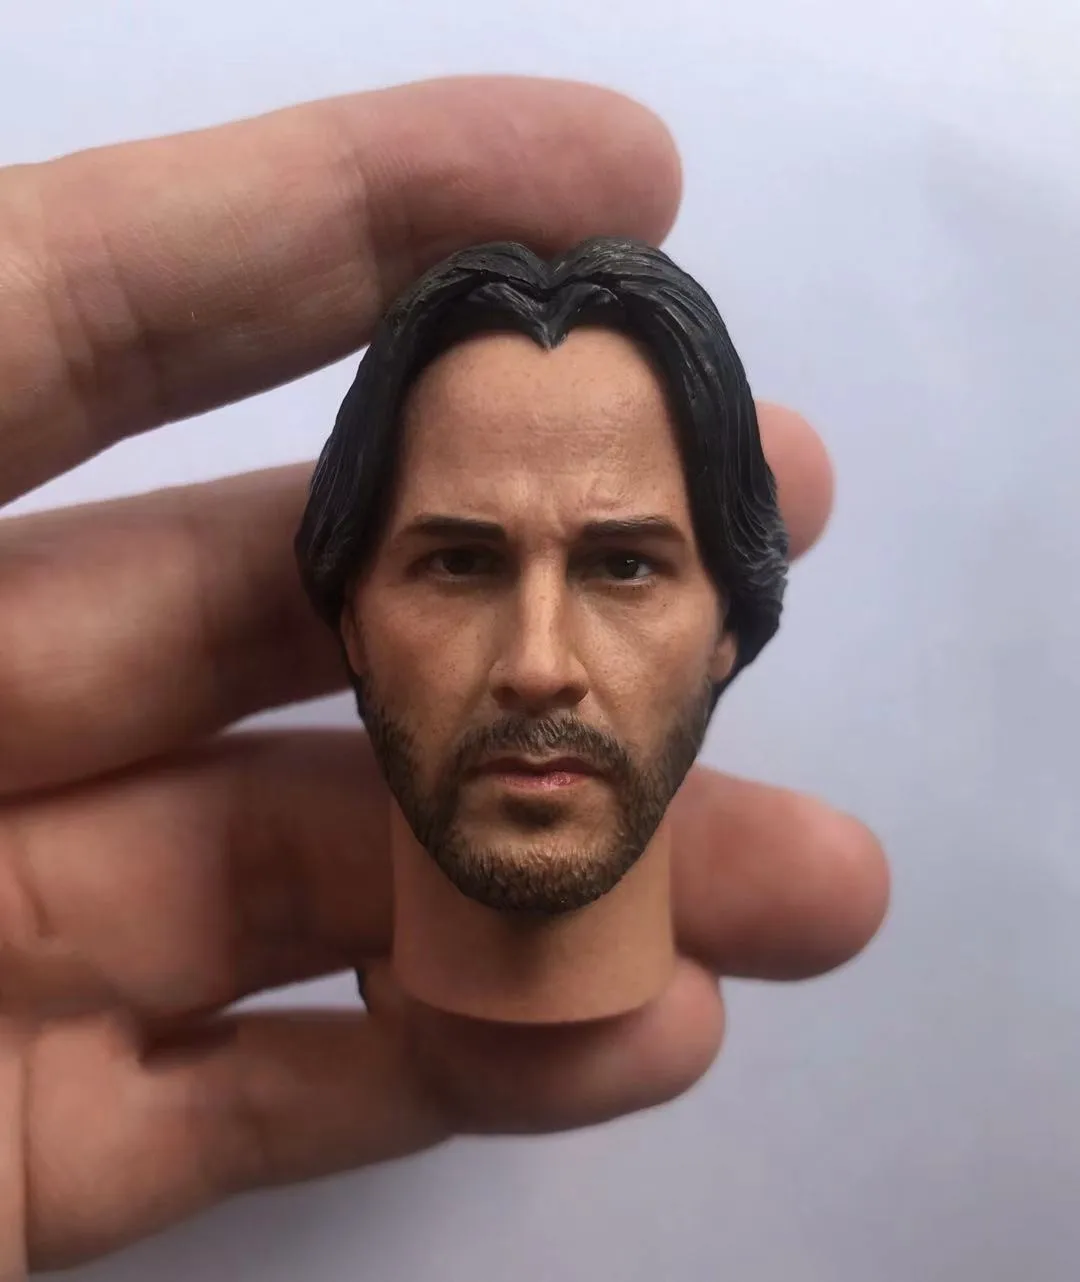 

1/6 Scale Male Head Carving Keanu Reeves Killer God 2.0 ActorModel For 12" Soldier Action Figure Body Game Toys